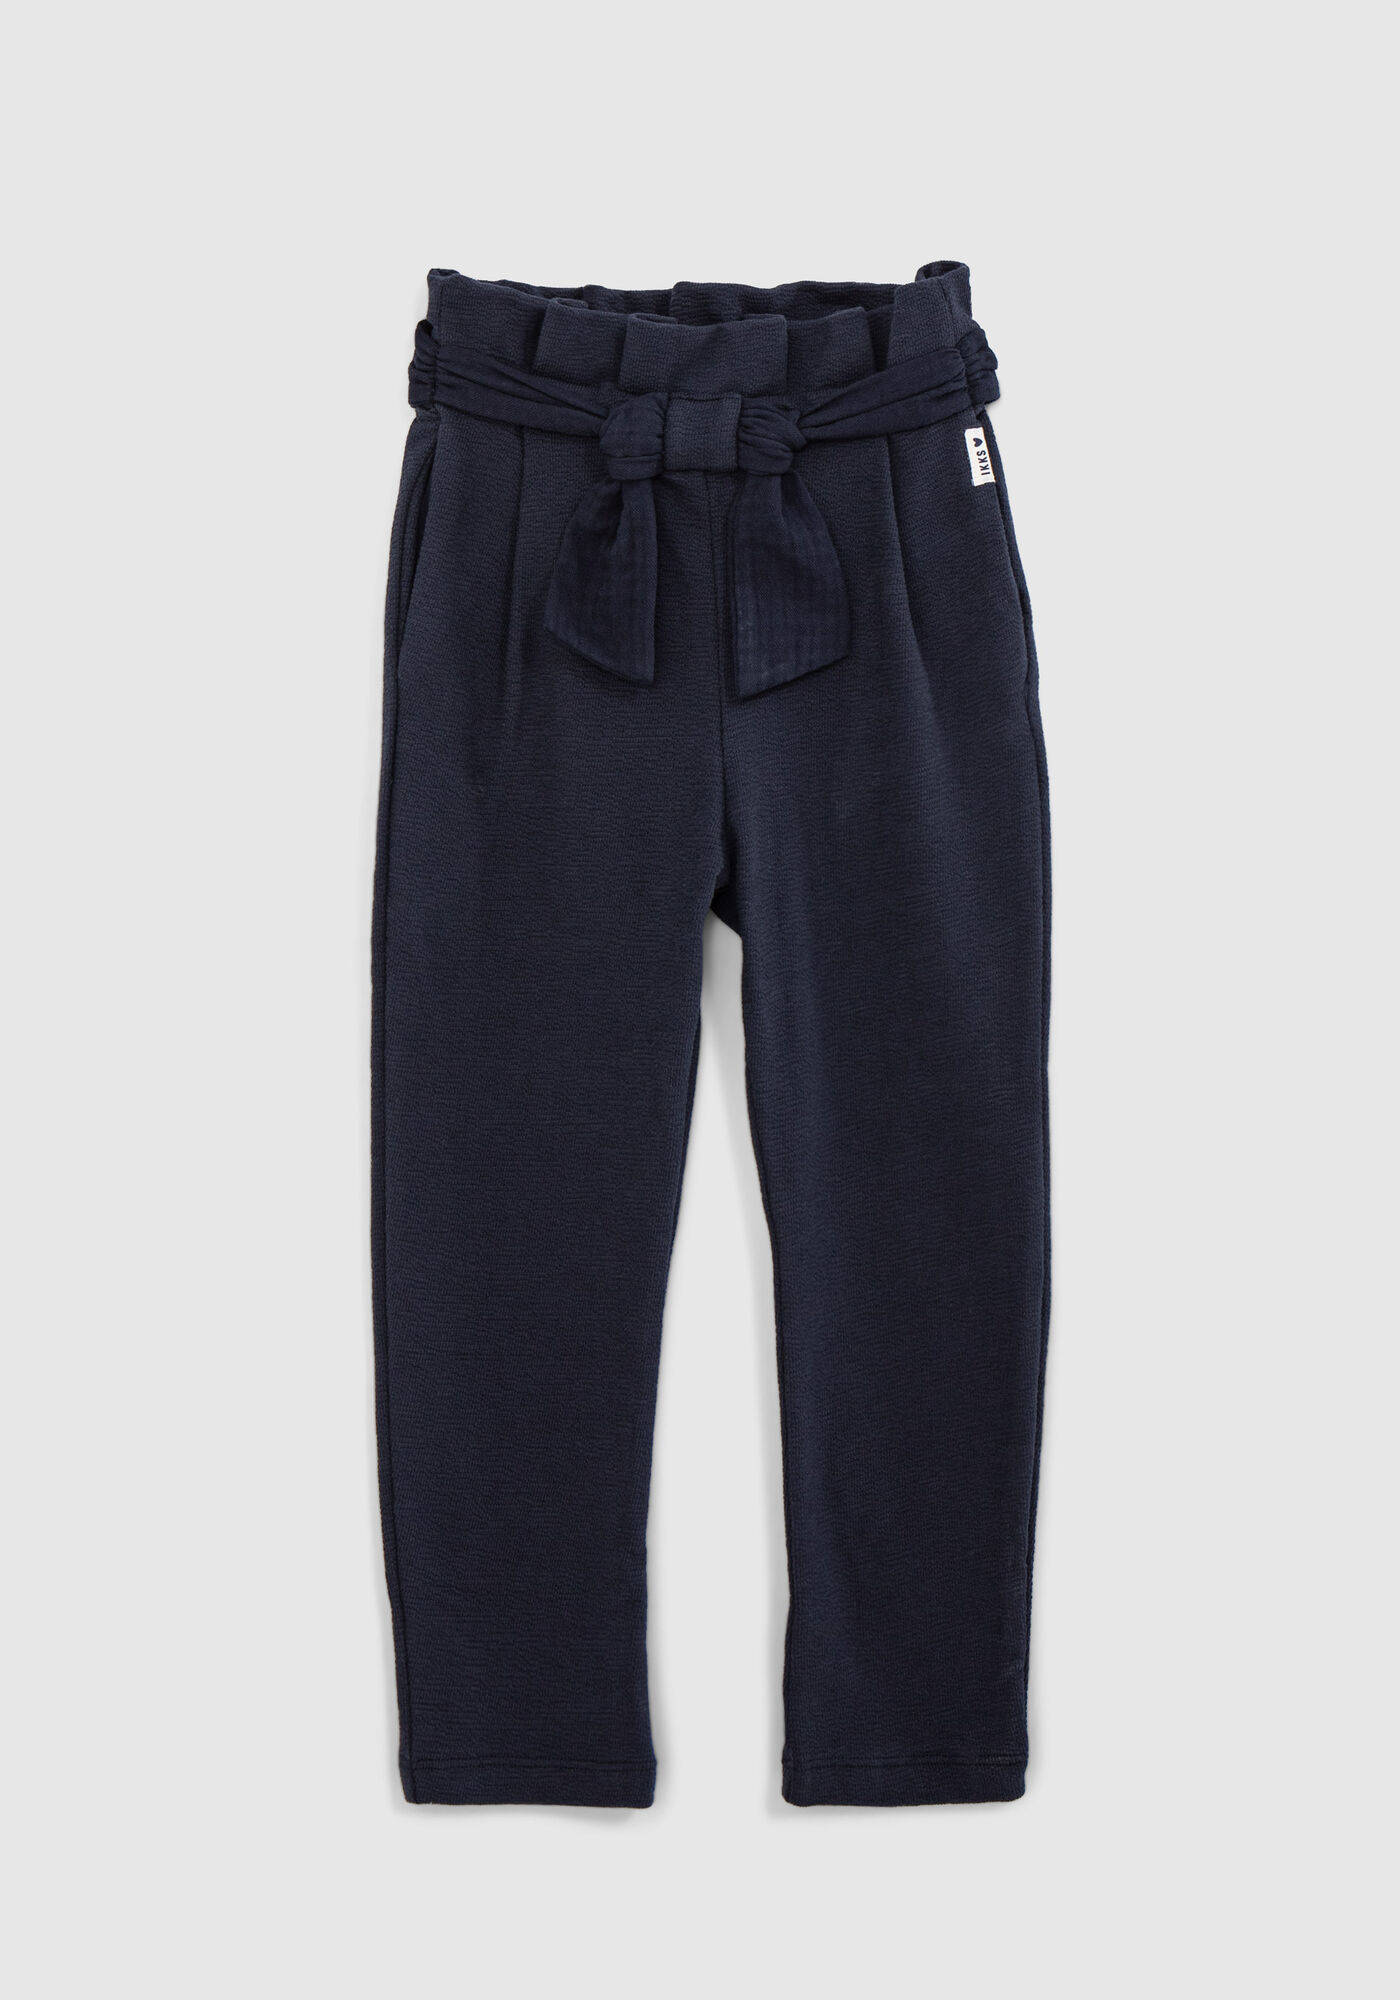 Girls' trousers with belt